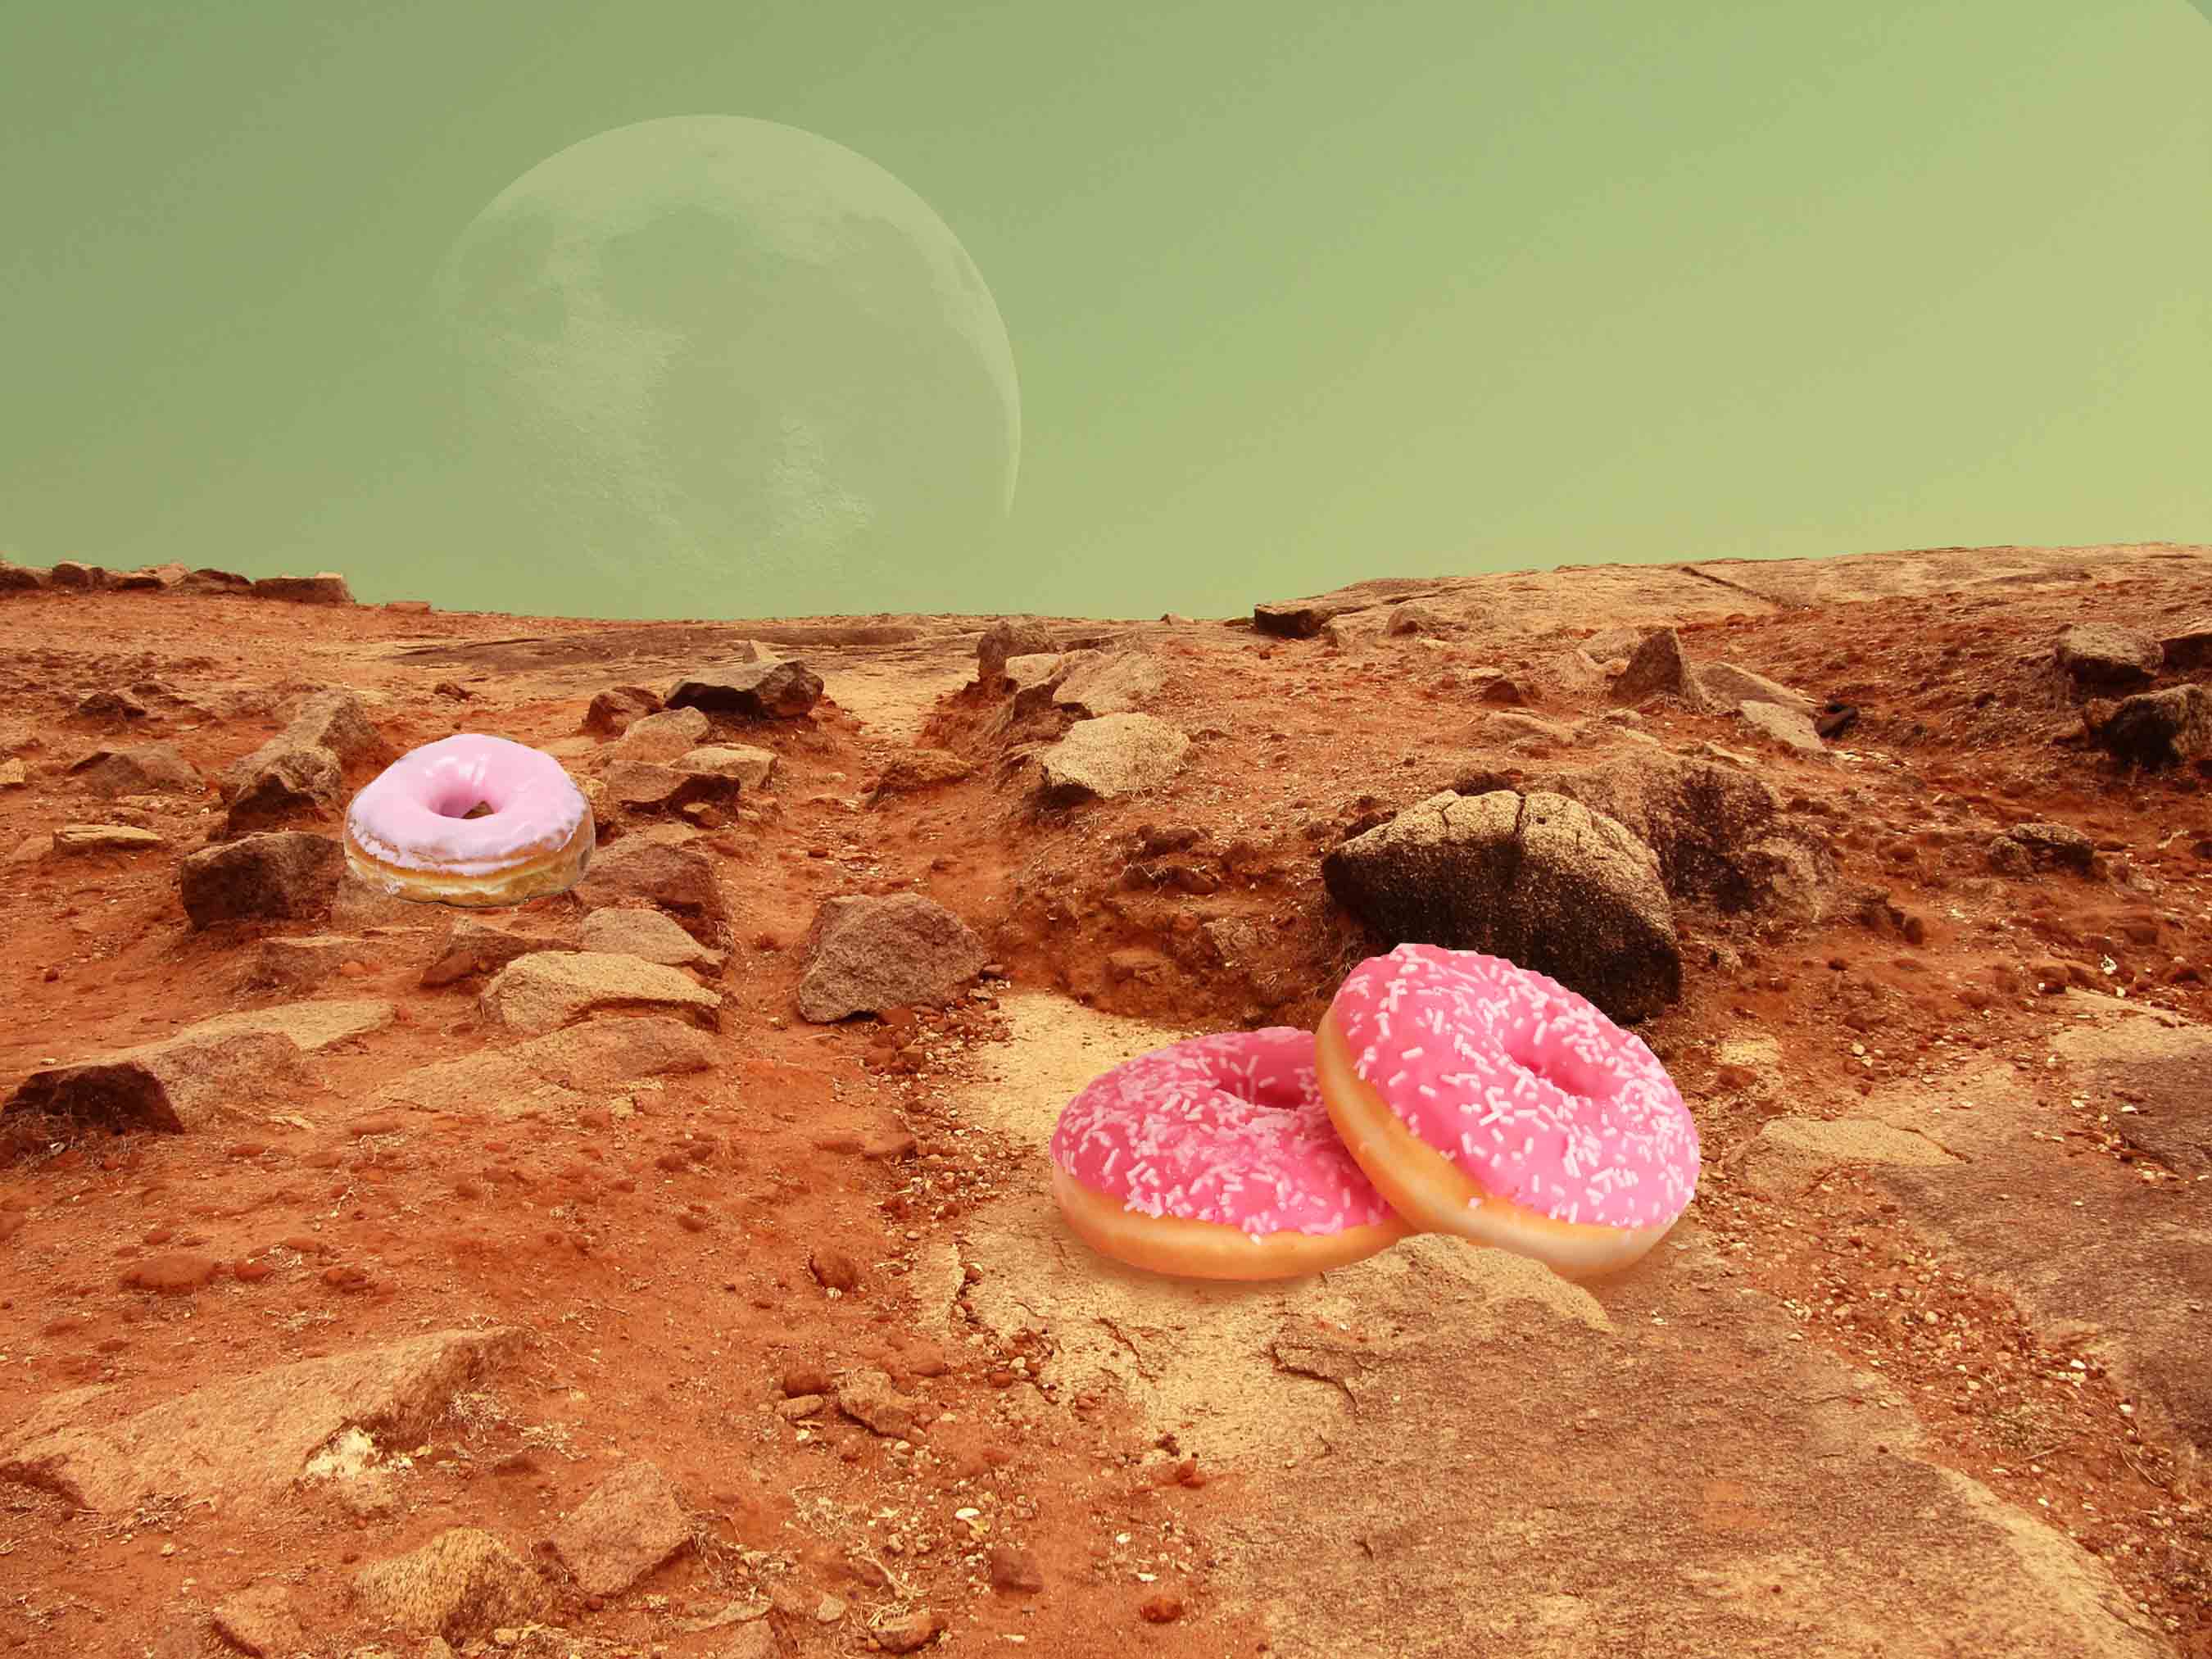 art every day number 544 moon pastry digital collage donuts